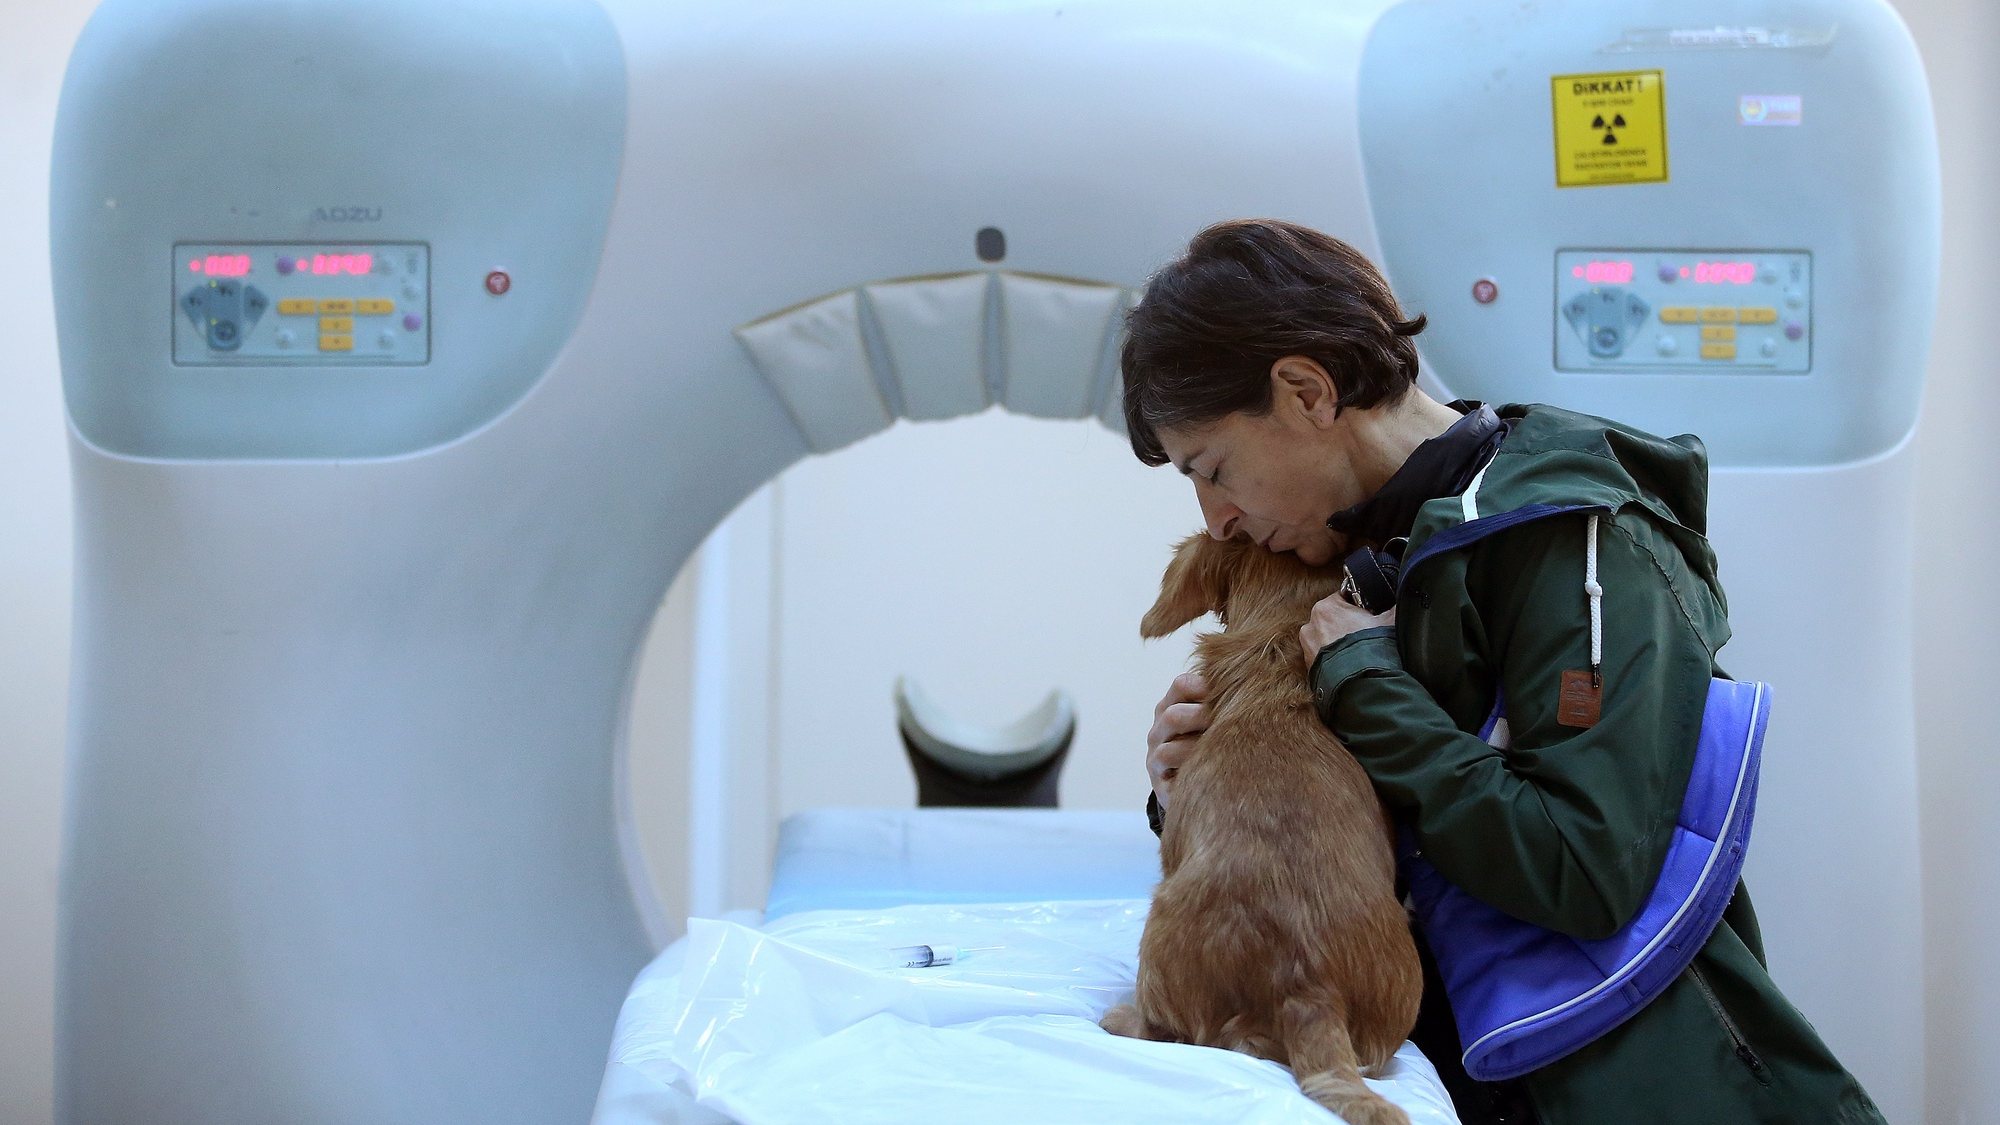 epa07250035 (06/23) A woman hugs her dog before it gets a narcosis for tomography screening at the Istanbul University Cerrahpasa Faculty of Veterinary Science Hospital in Istanbul, Turkey, 13 December 2018. The Istanbul University Cerrahpasa Faculty of Veterinary Science Hospital in the Turkish city of Istanbul opened in 1987 and treats thousands of sick animals every year. The hospital is split into five departments specializing in internal diseases, surgery, obstetrics and gynecology, artificial insemination and wild animal reproduction. It also has an emergency room that is staffed 24 hours a day. The hospital treats some 50,000 animals every year, mostly pets, and is funded by vet bills paid by owners.  EPA/ERDEM SAHIN    ATTENTION: For the full PHOTO ESSAY text please see Advisory Notice epa07250029